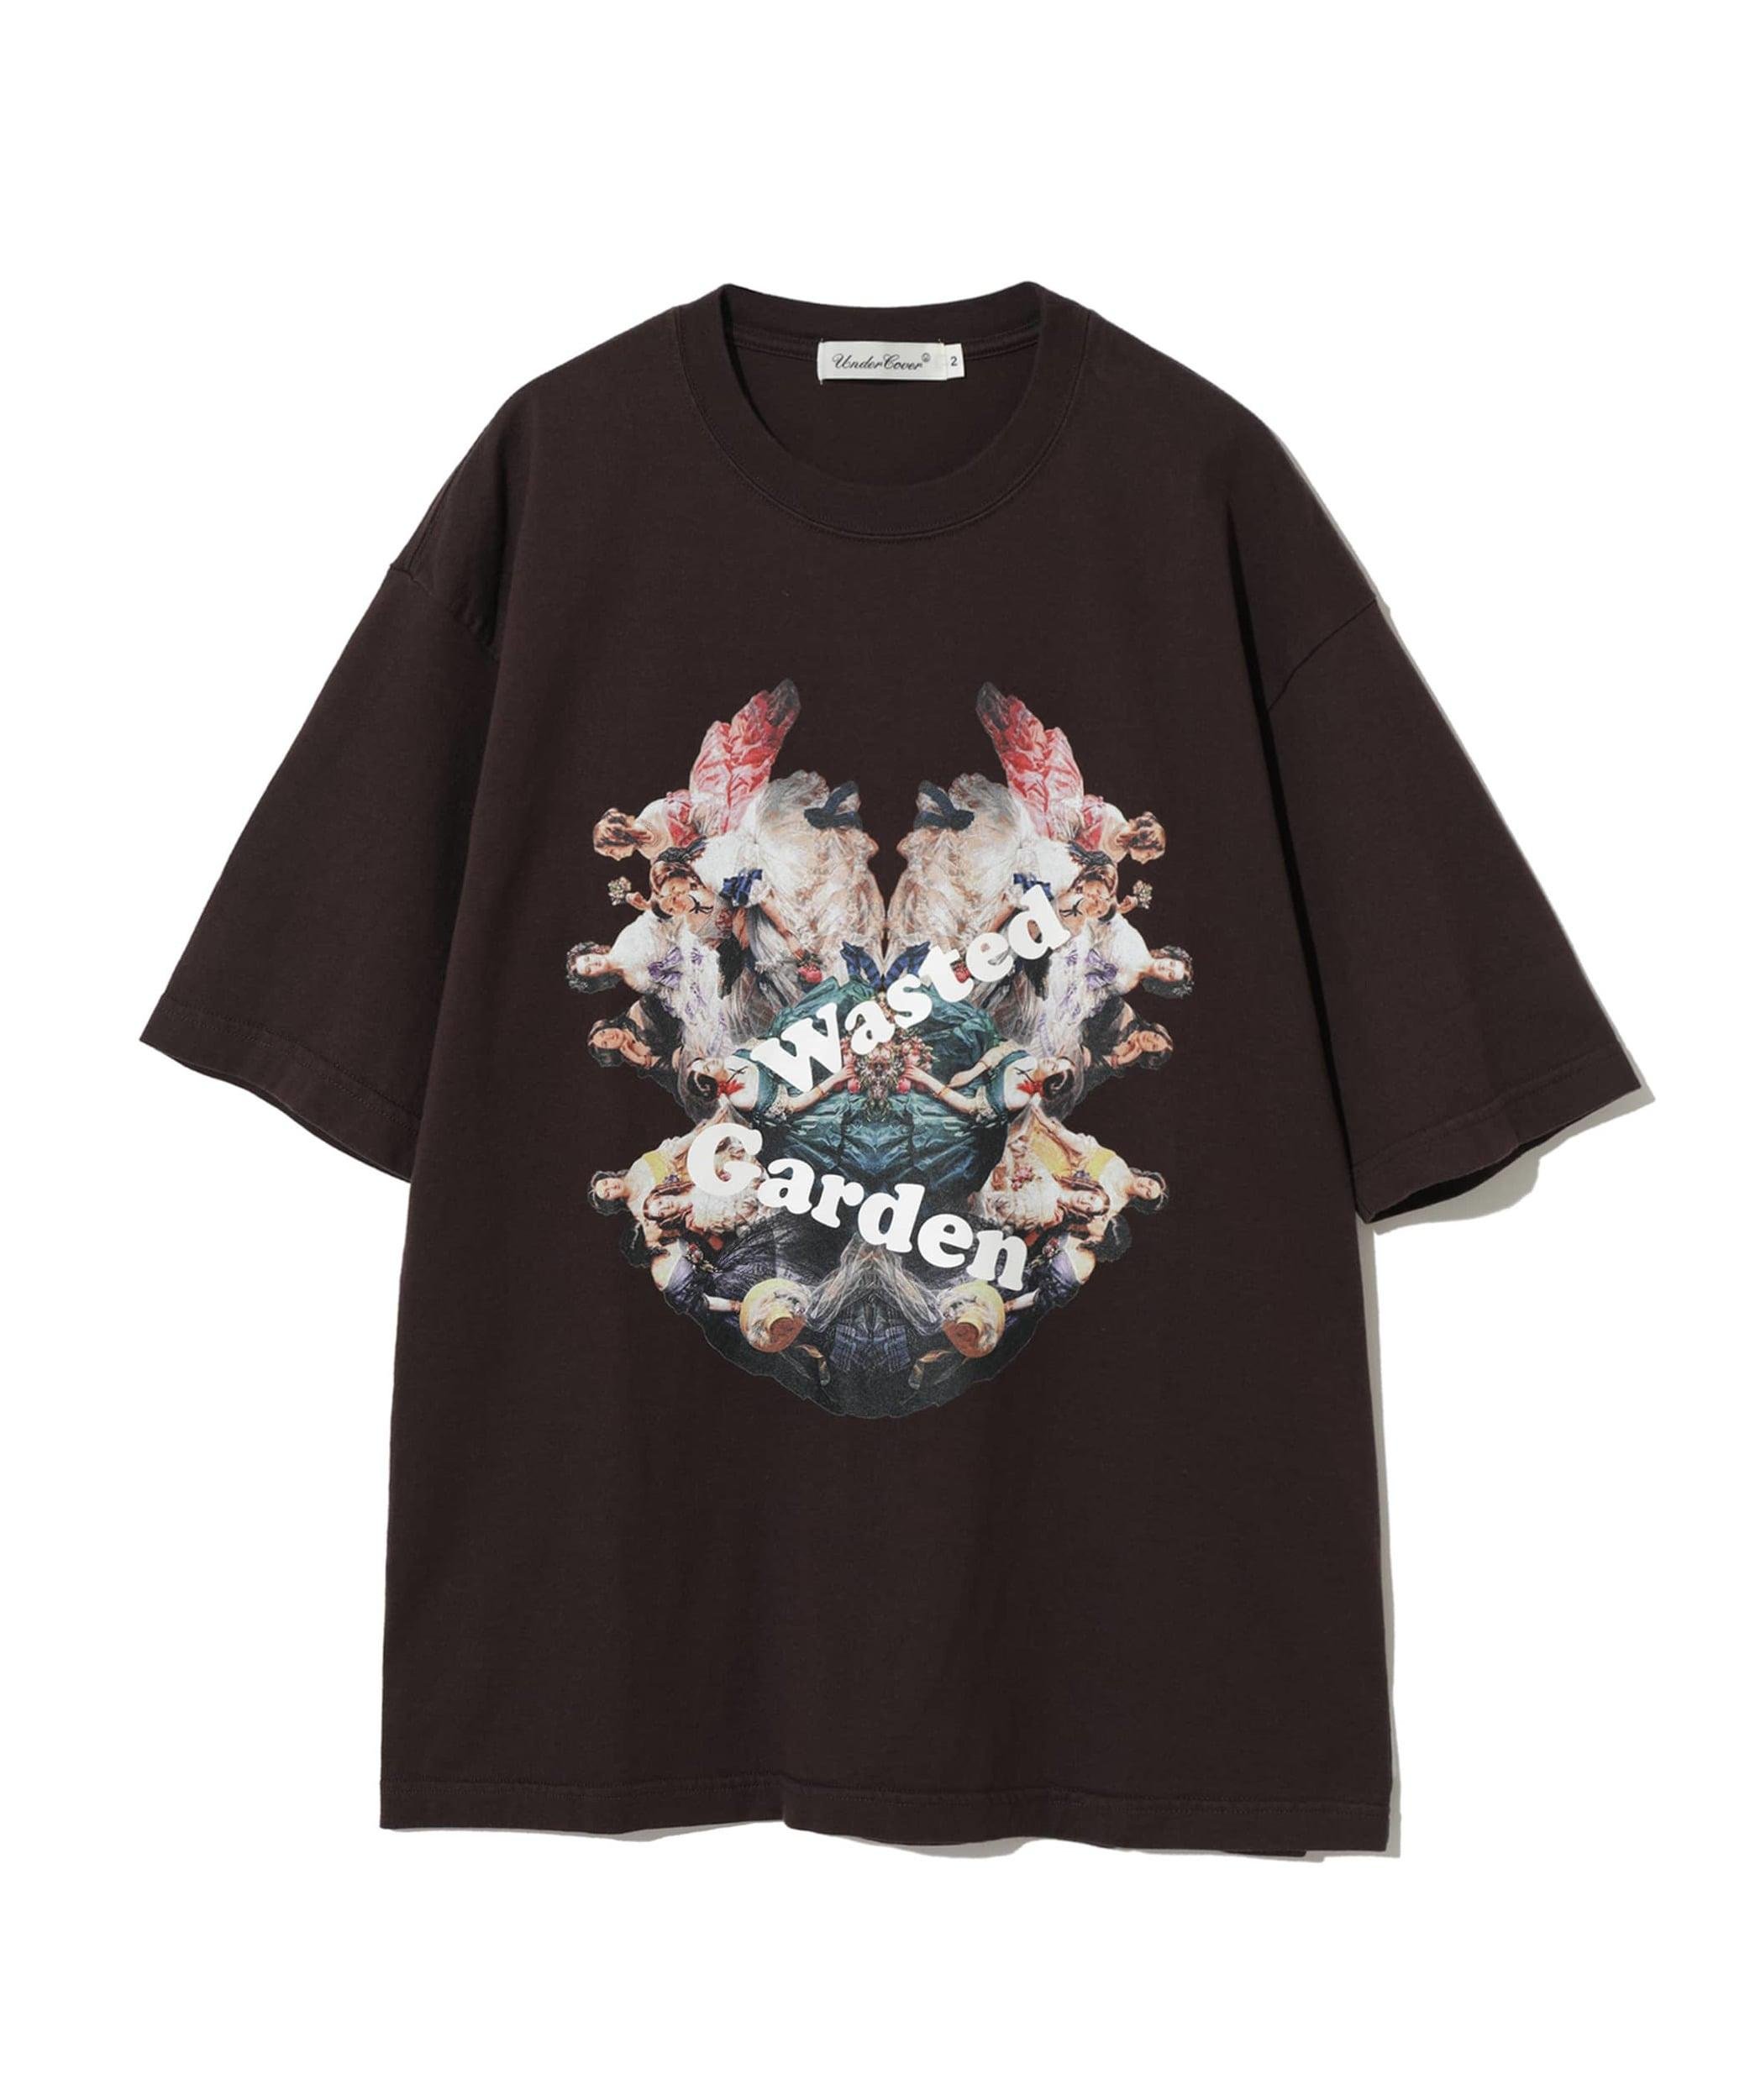 Undercover - Wasted Garden T-Shirt - (Brown) by UNDERCOVER